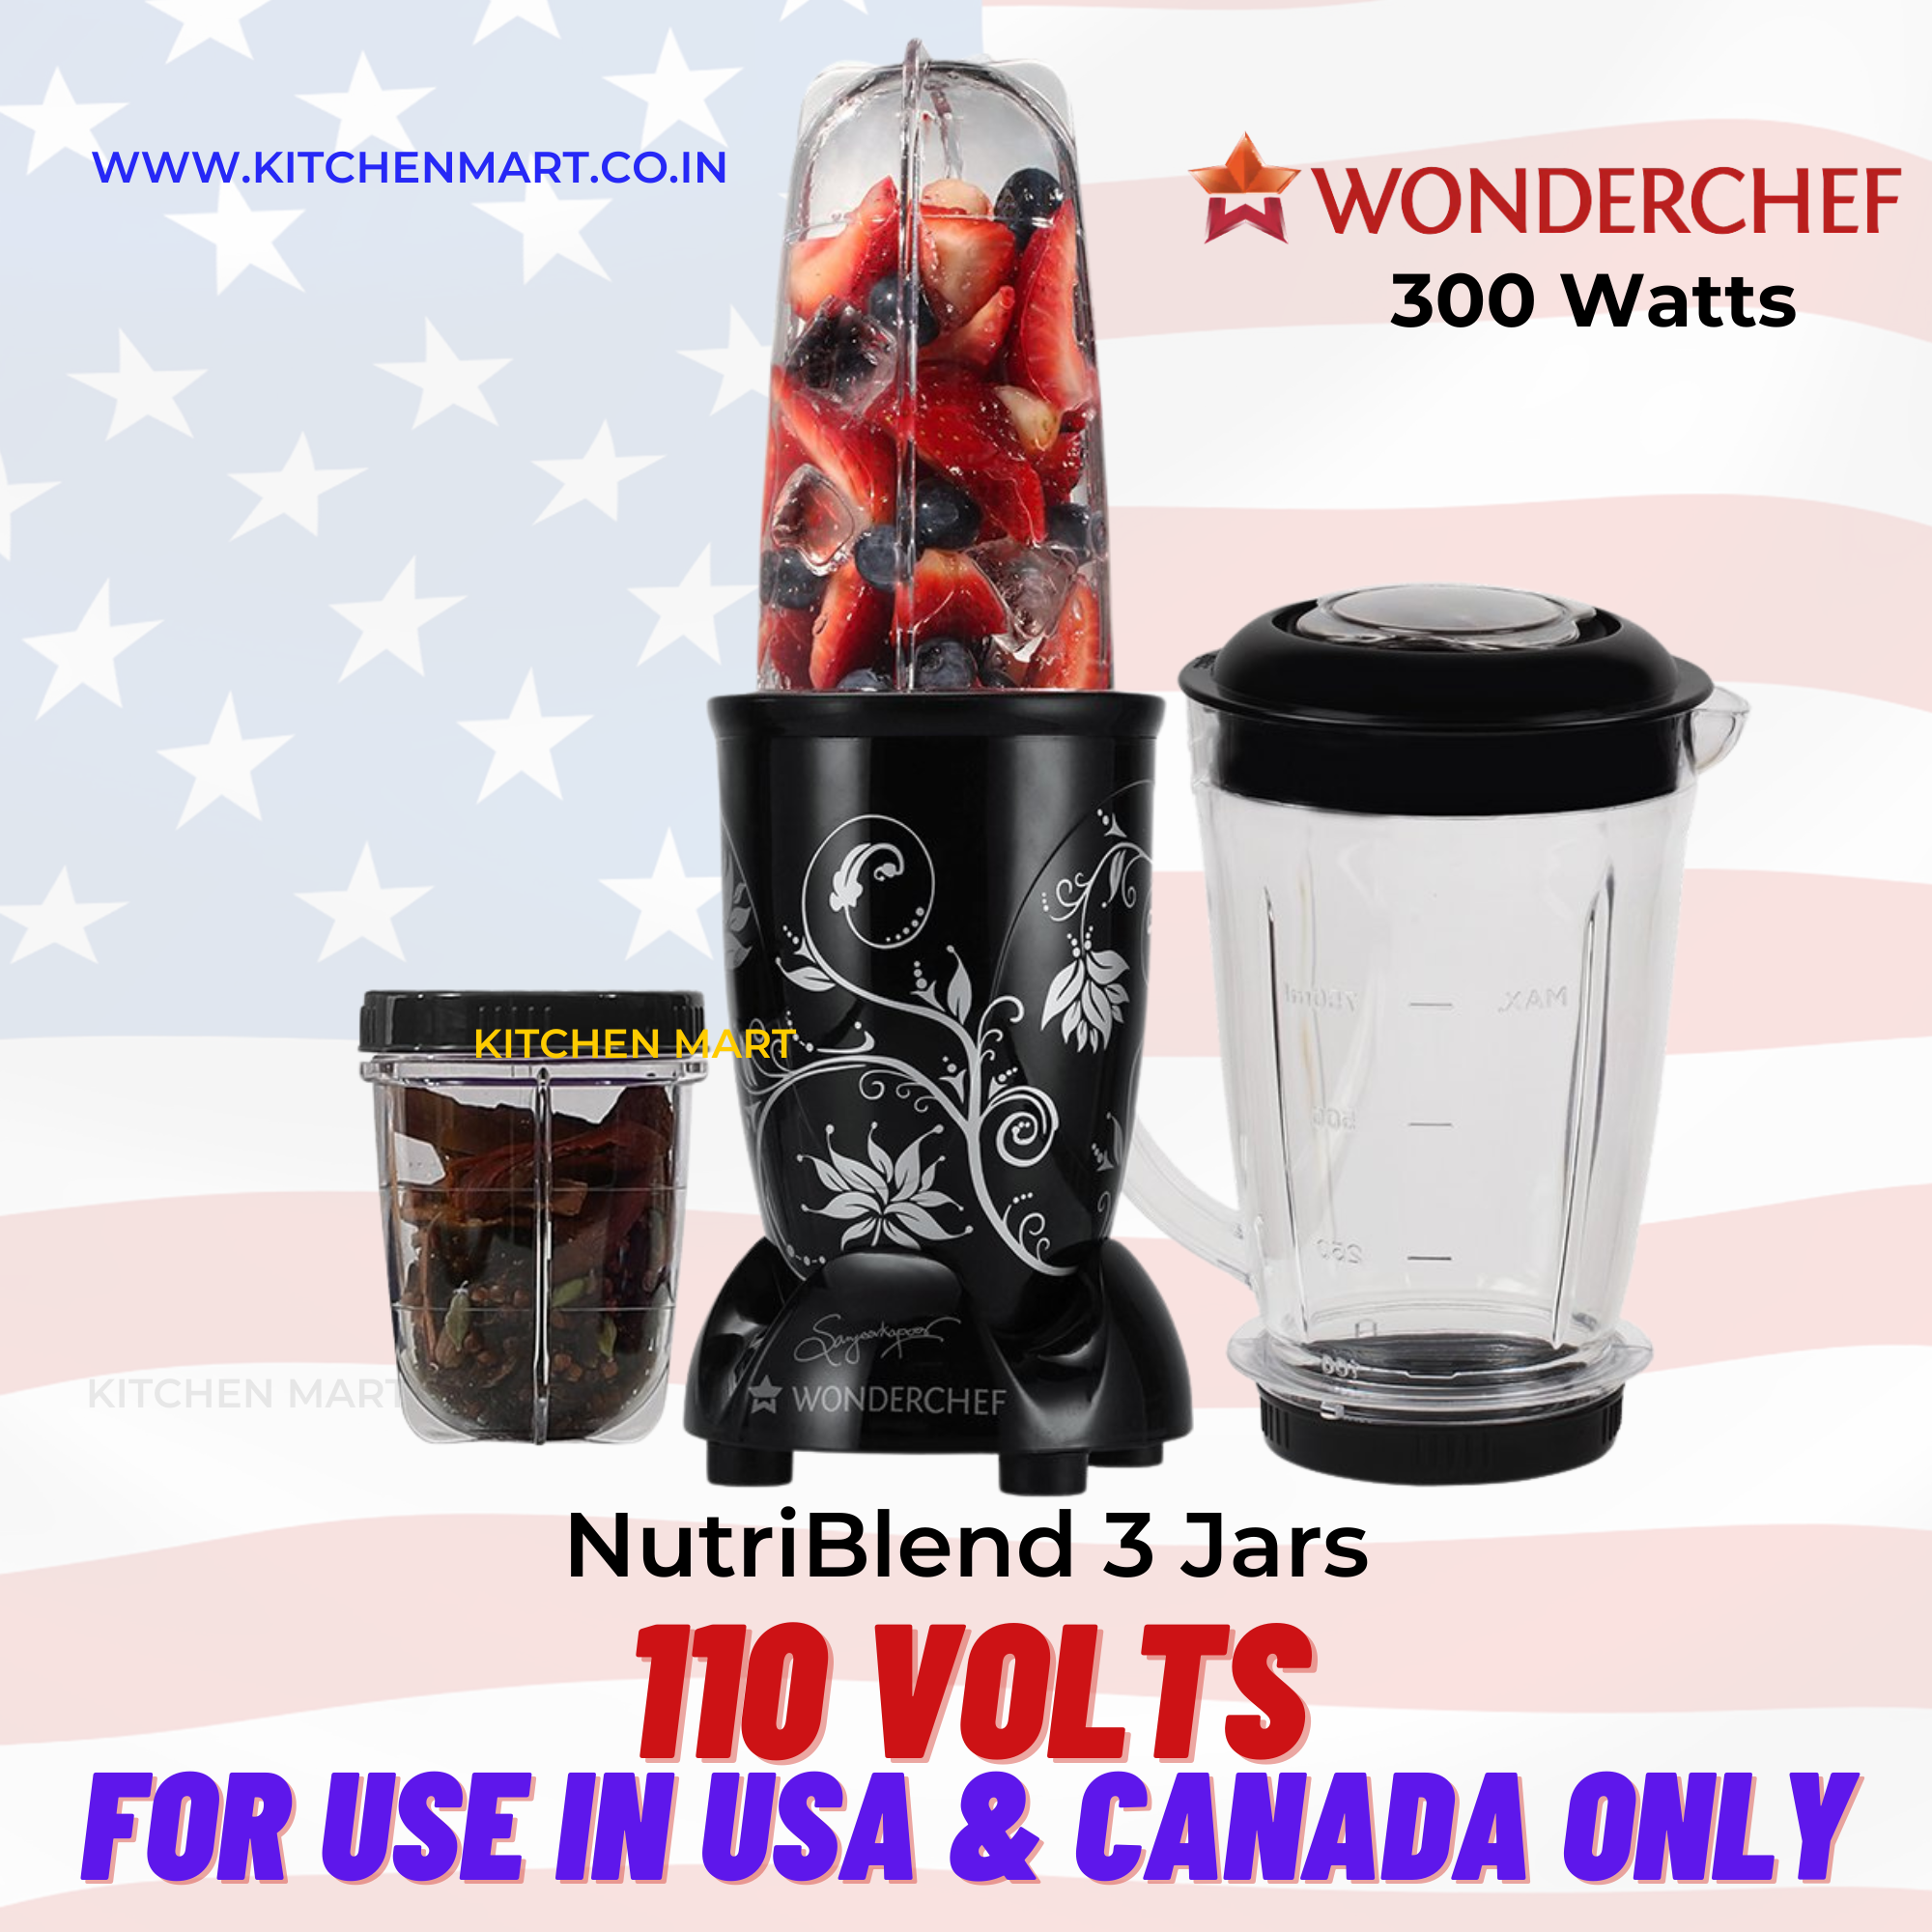 Wonderchef Nutri-blend Mixer, Grinder & Blender 300 Watts (110 Volts for use in USA and Canada only)